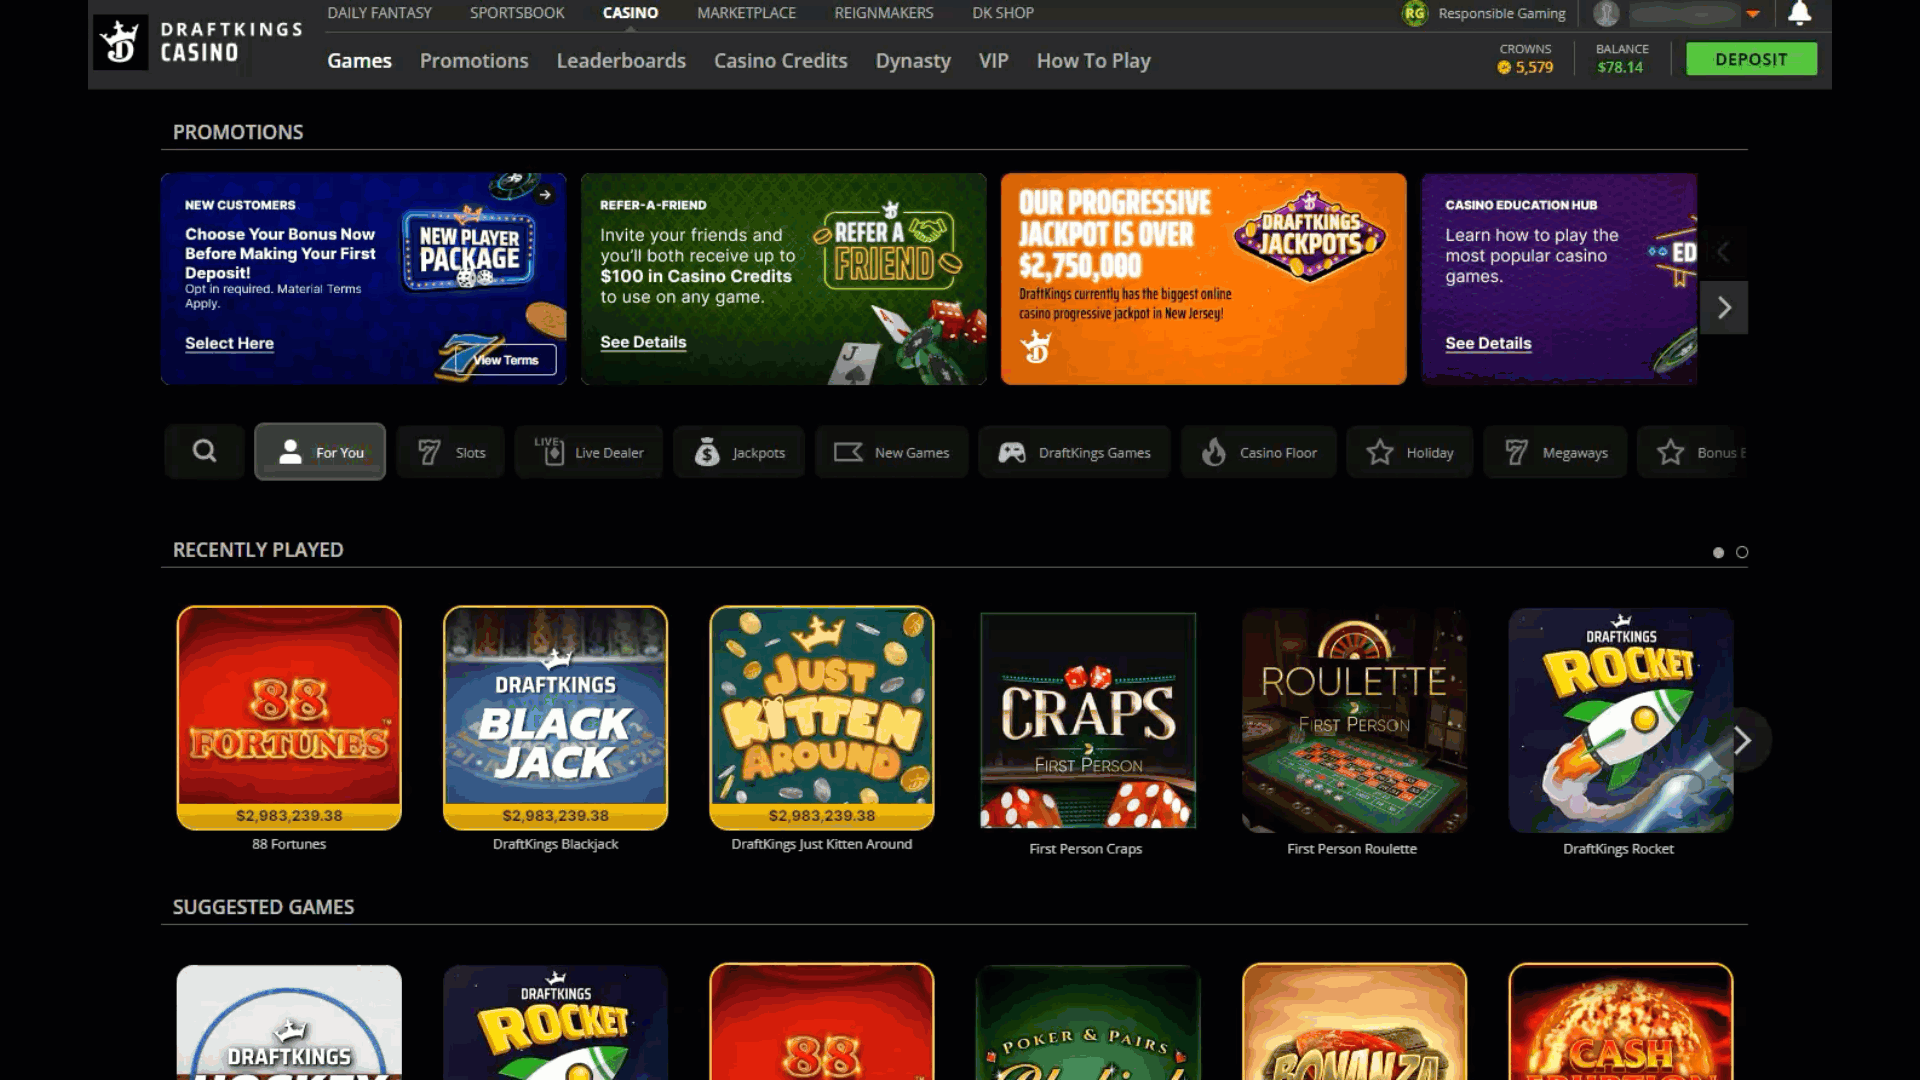 Step by step for how to convert DraftKings Crowns to DK Dollars on the DraftKings website